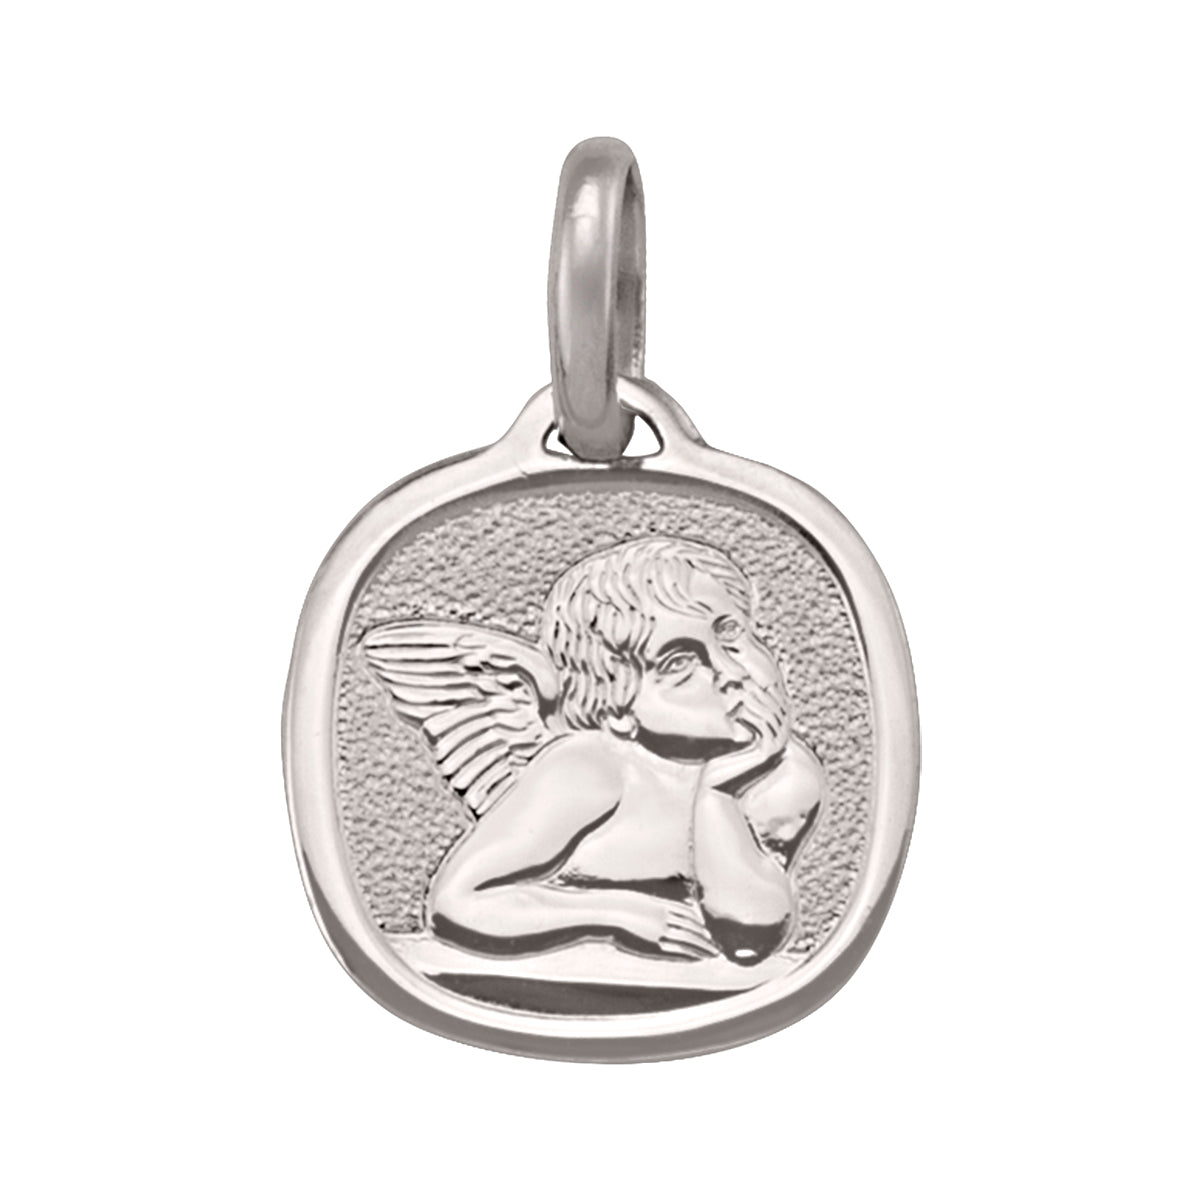 ANGEL MEDAL WHITE GOLD SOLID